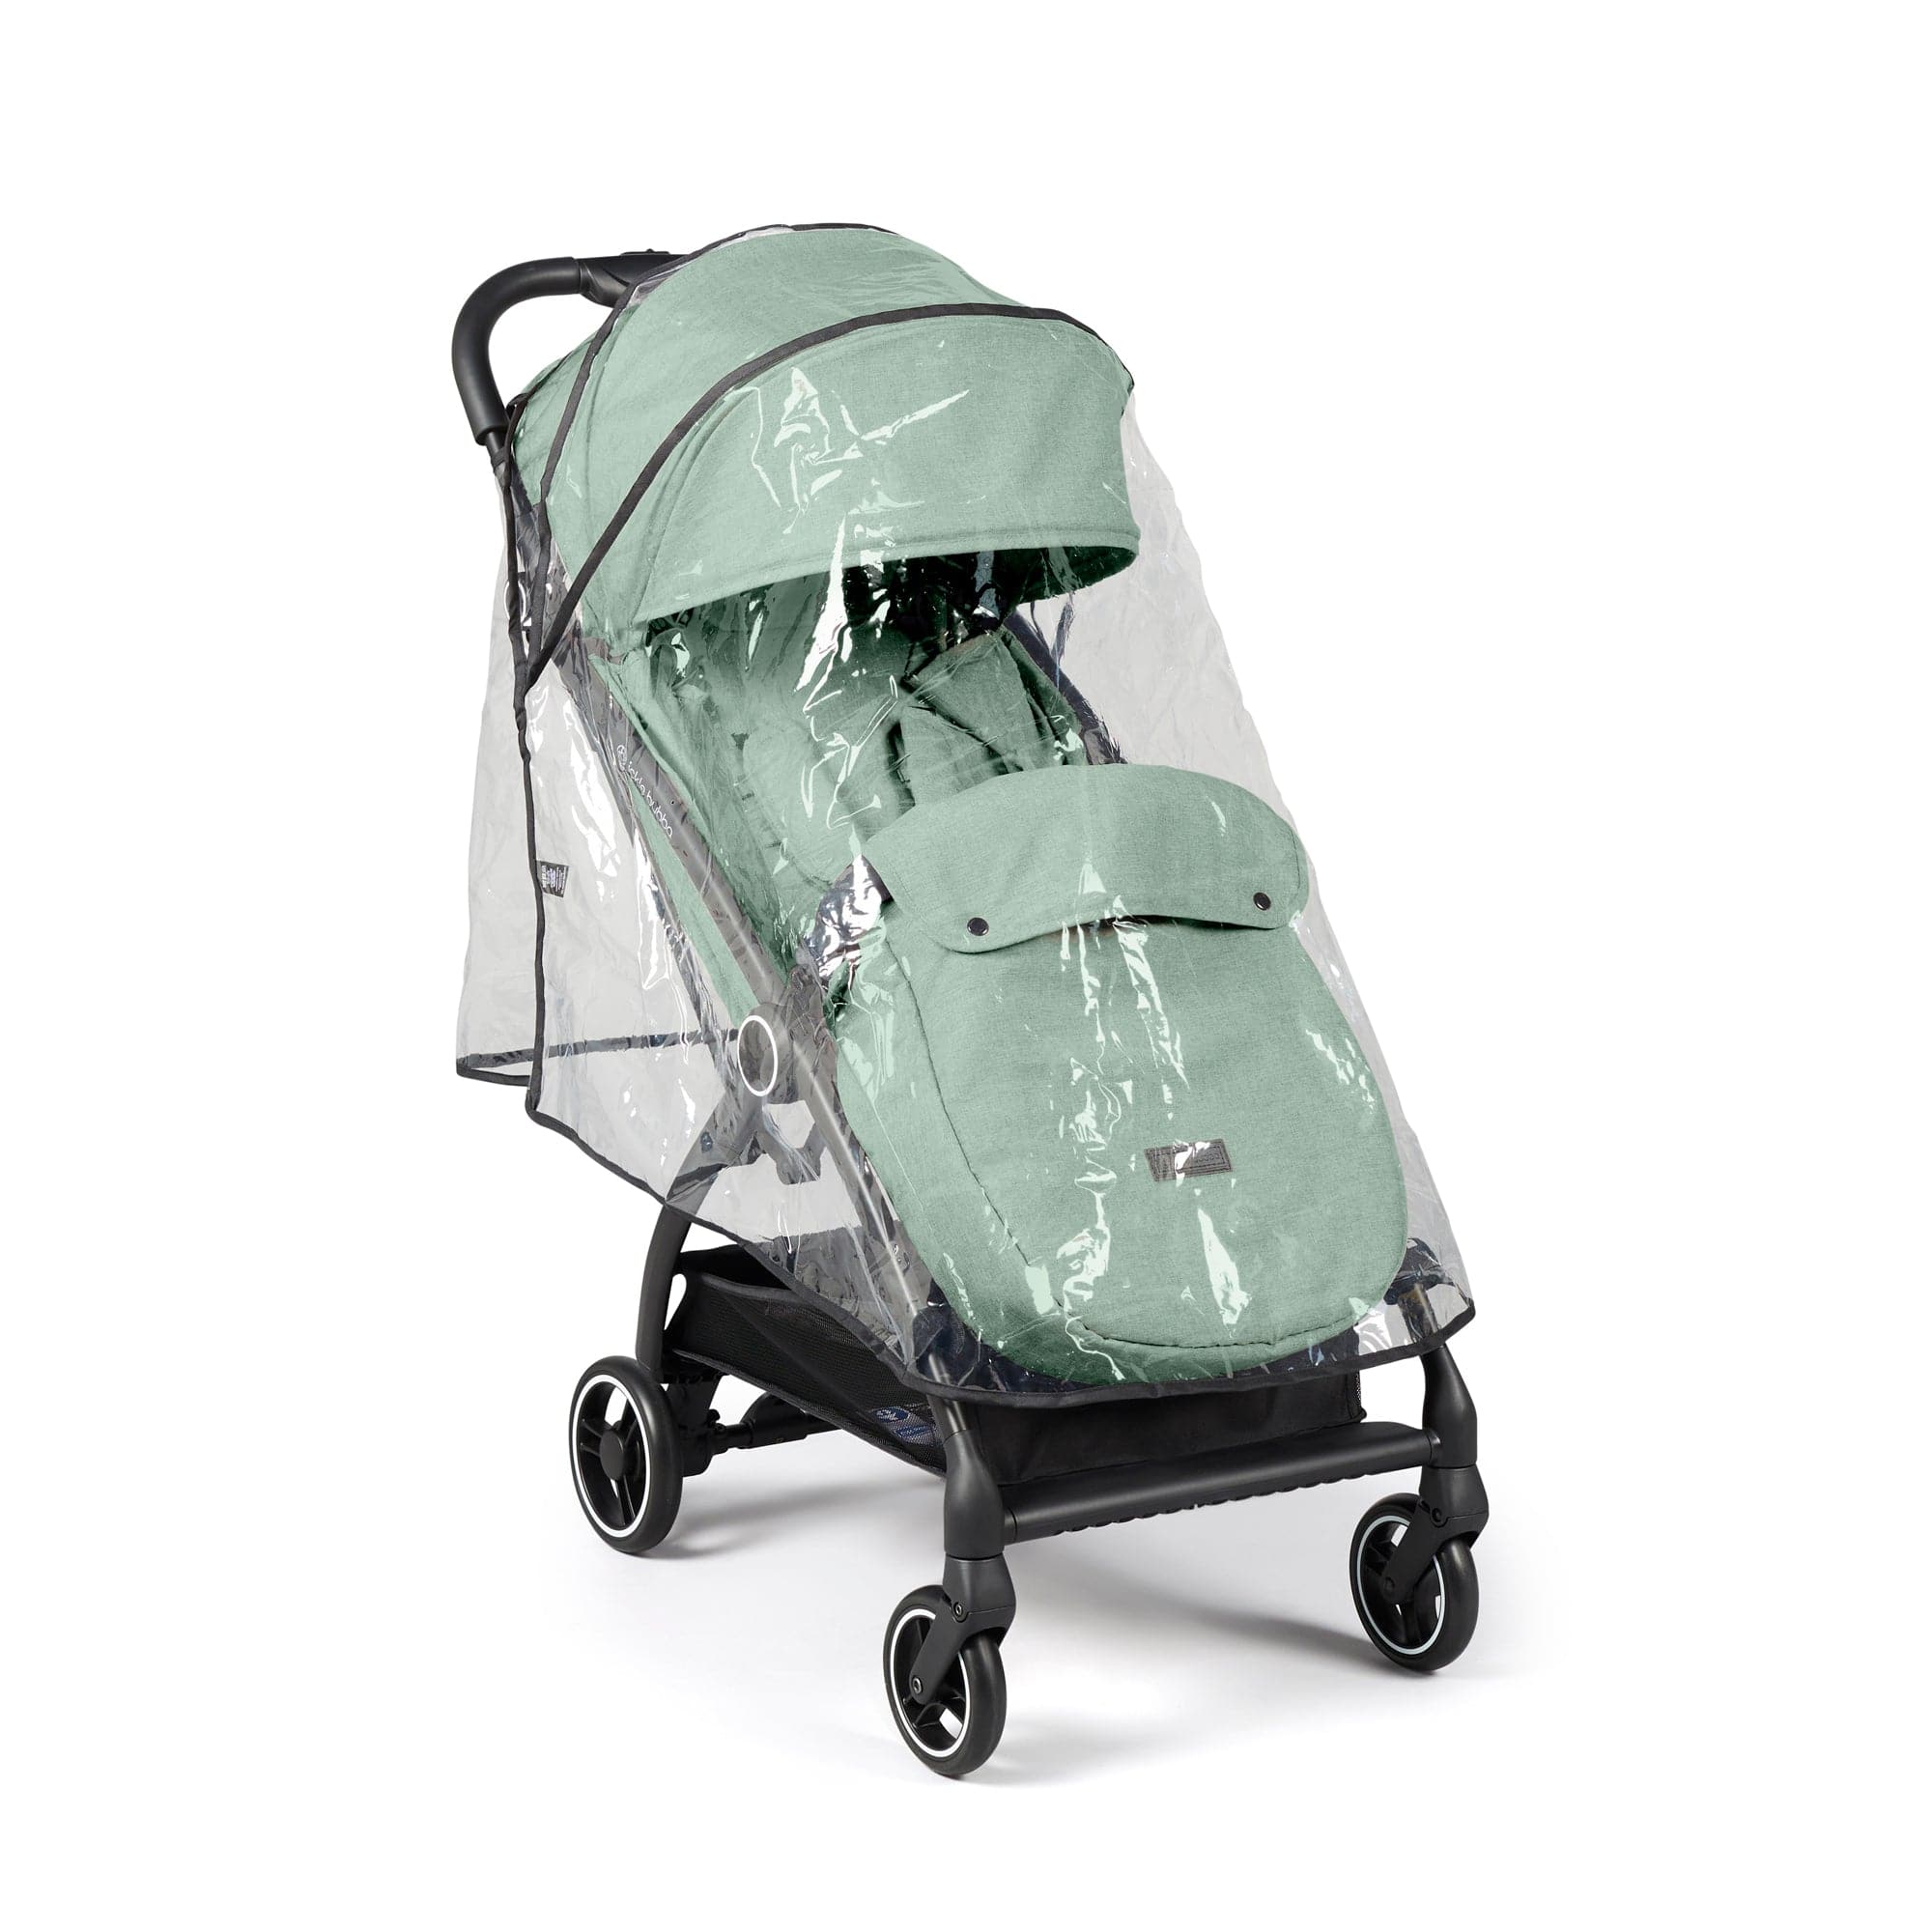 Ickle Bubba baby pushchairs Ickle Bubba Aries Prime Autofold Stroller - Sage Green 15-005-300-152